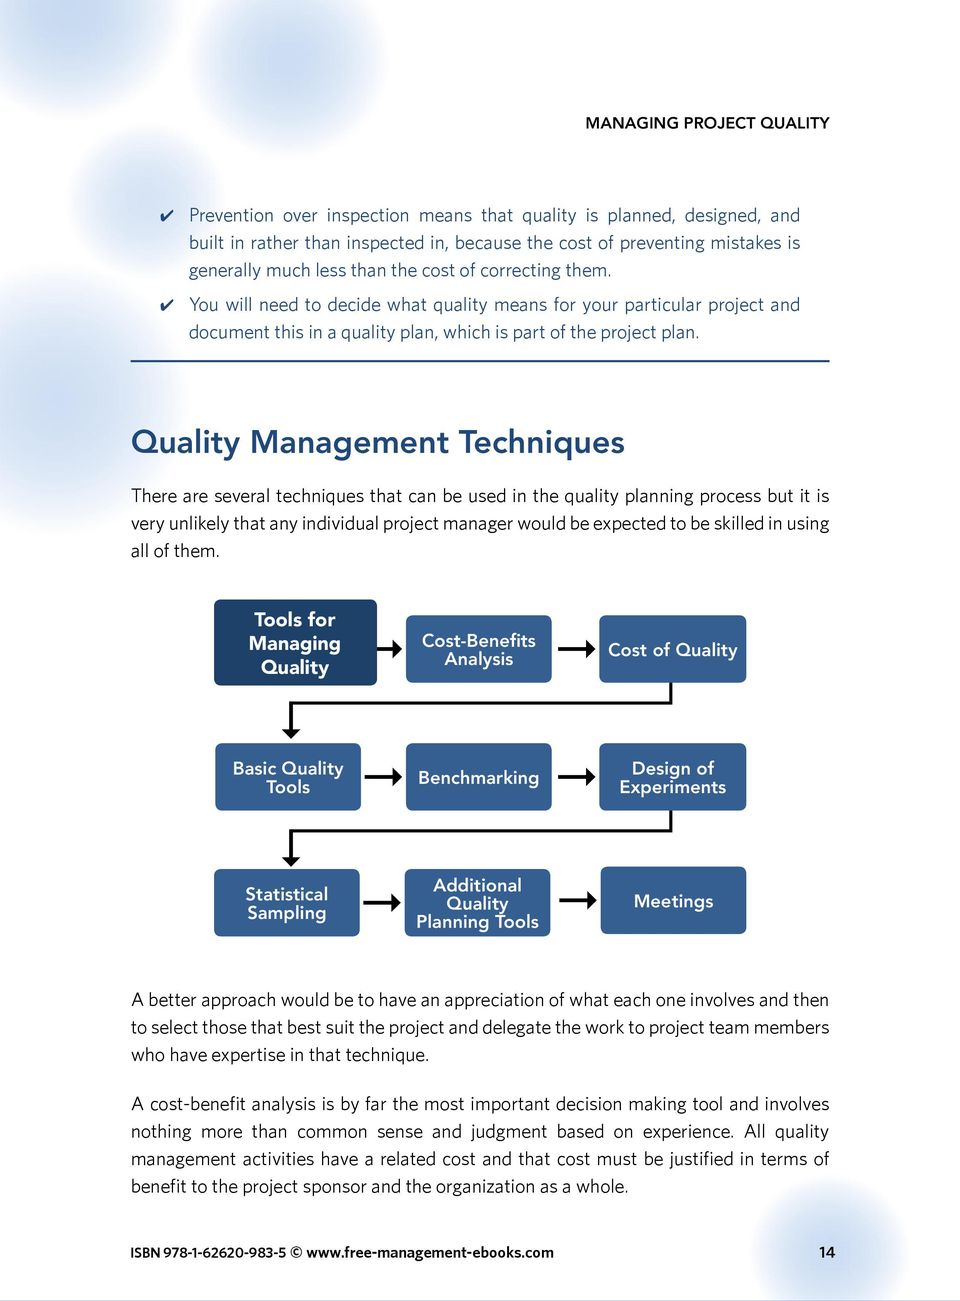 Quality Management Techniques There are several techniques that can be used in the quality planning process but it is very unlikely that any individual project manager would be expected to be skilled